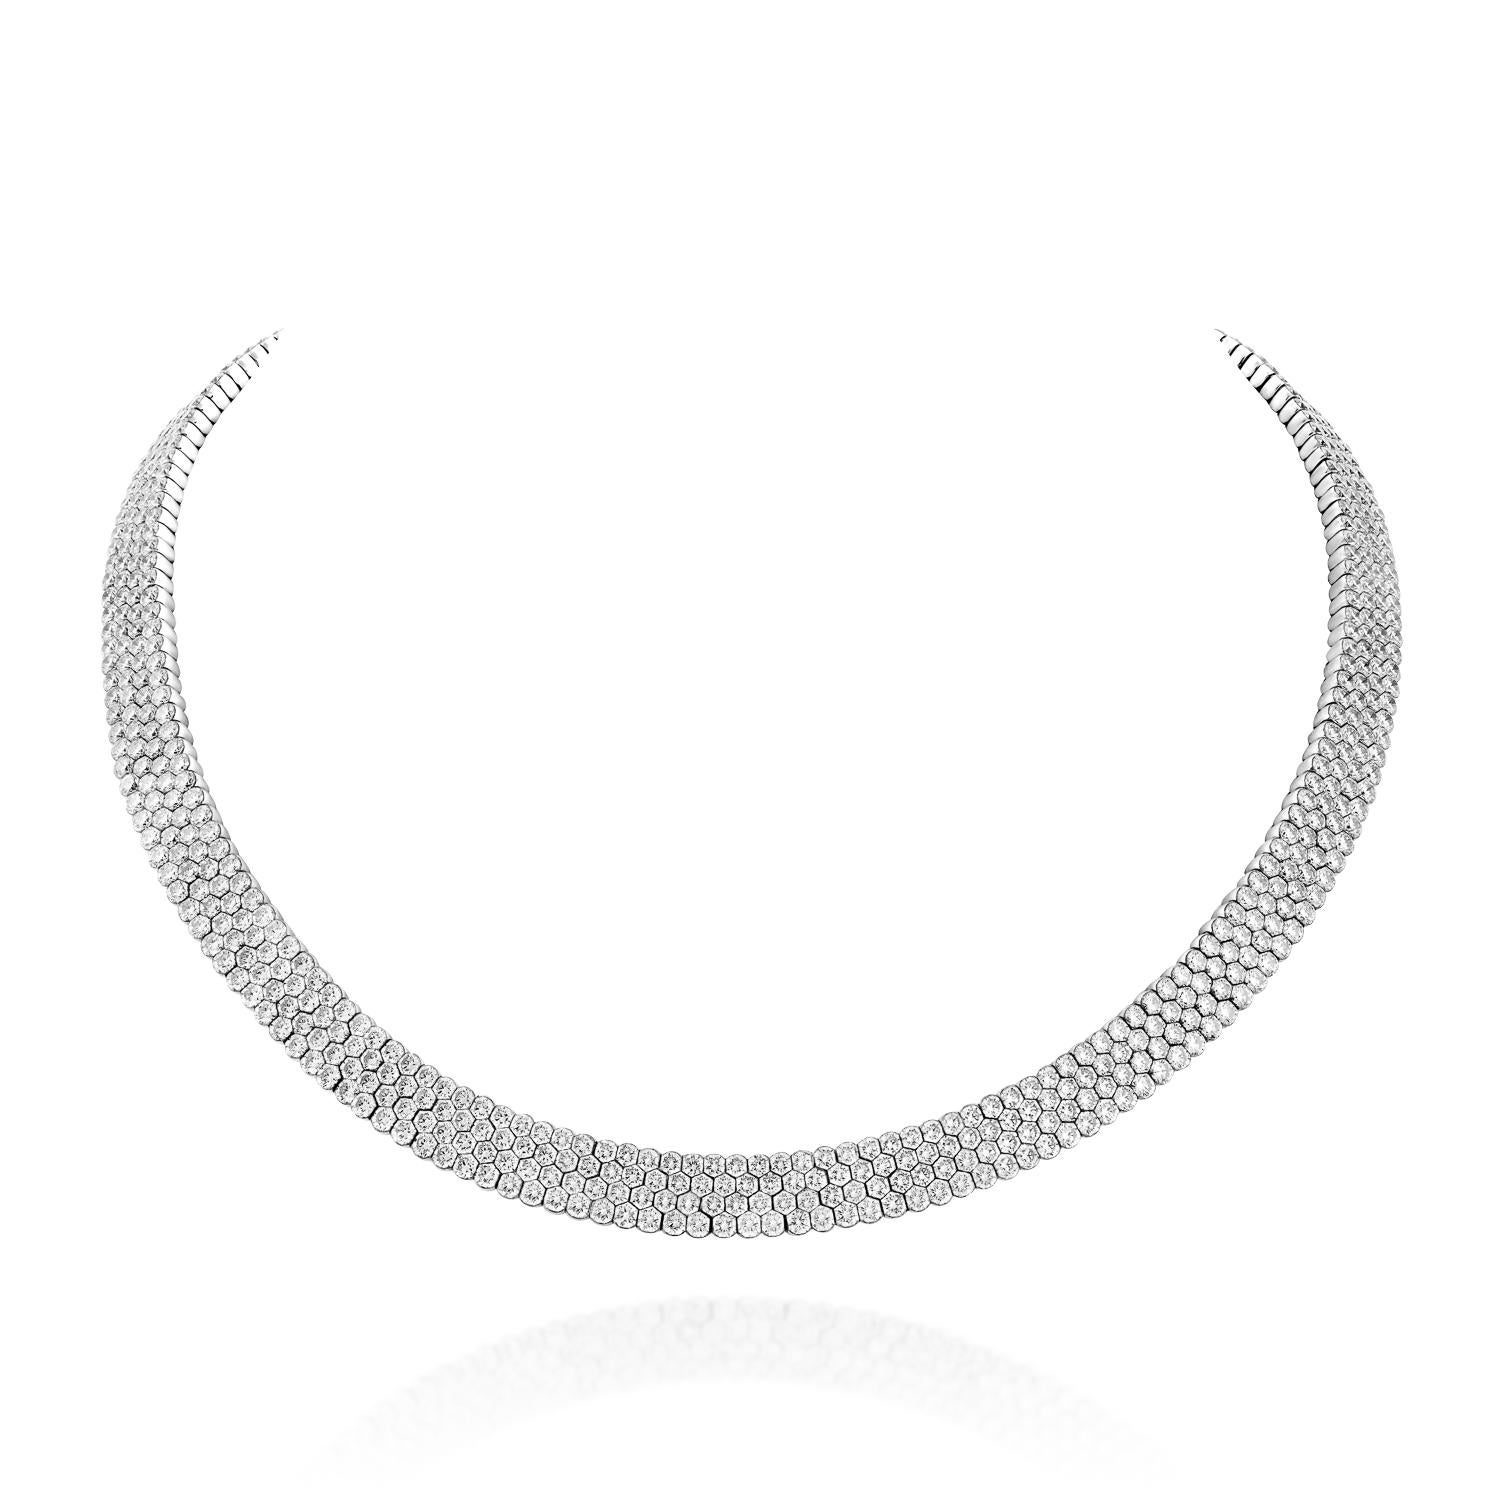 Indulge in the ultimate luxury with the Geraldo 57.10 Carat 4 Row Invisible Setting Diamond White Gold Necklace, a true masterpiece that exudes opulence and elegance. From the moment you slip it on, the sheer beauty and radiance of this necklace